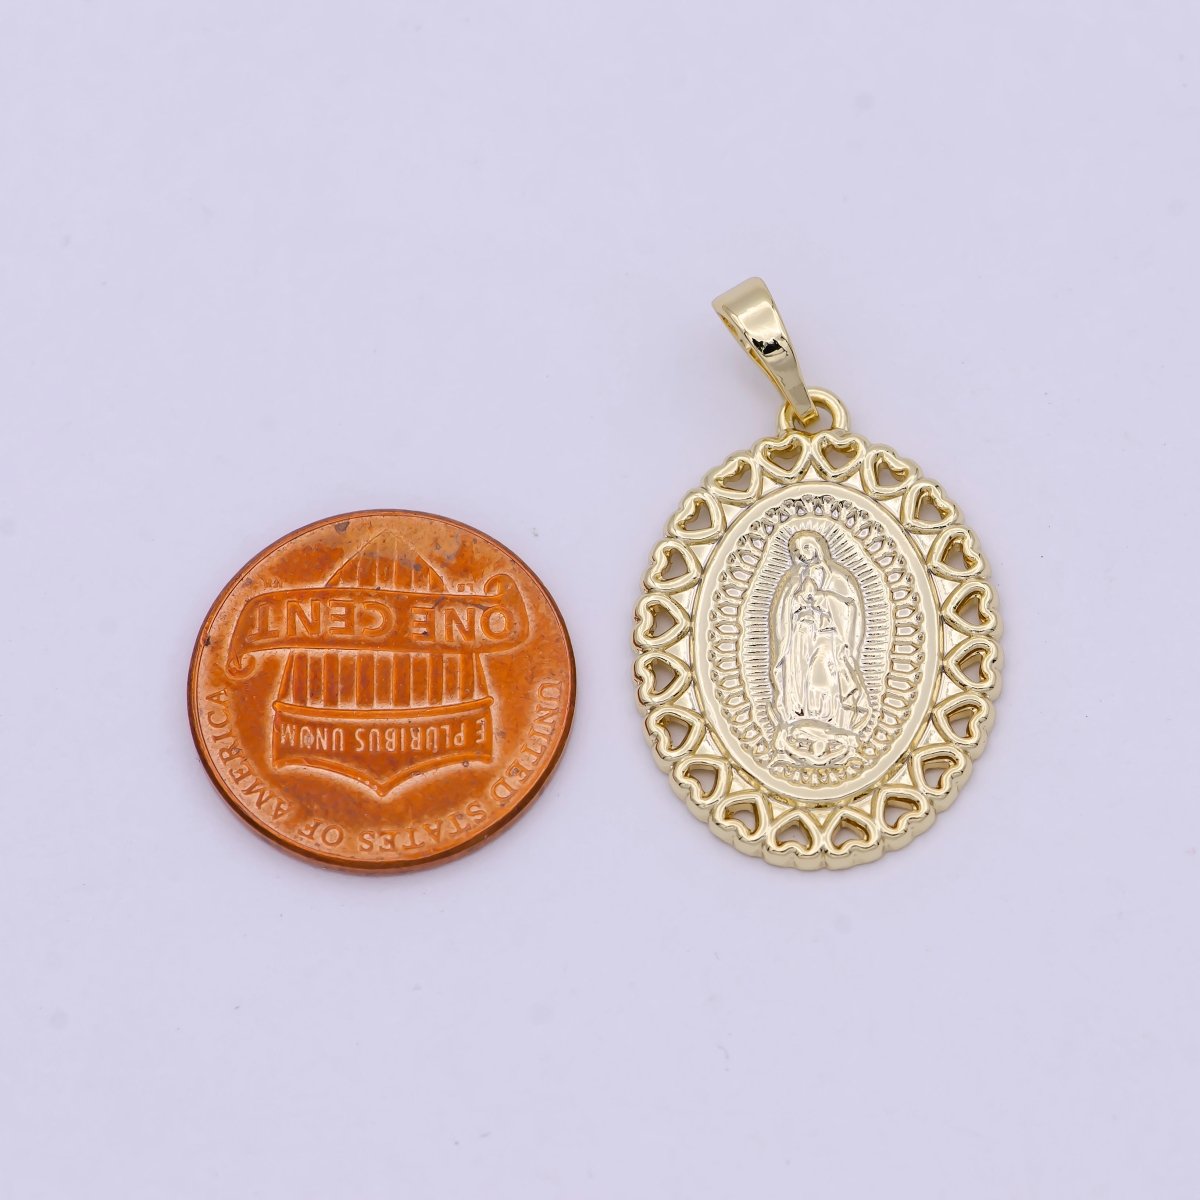 14K Gold Filled Our Lady of Guadalupe Charm Necklace Small Dainty Oval Gold Virgin Mary Pendant Necklace Women Religious Jewelry Gift H-475 - DLUXCA